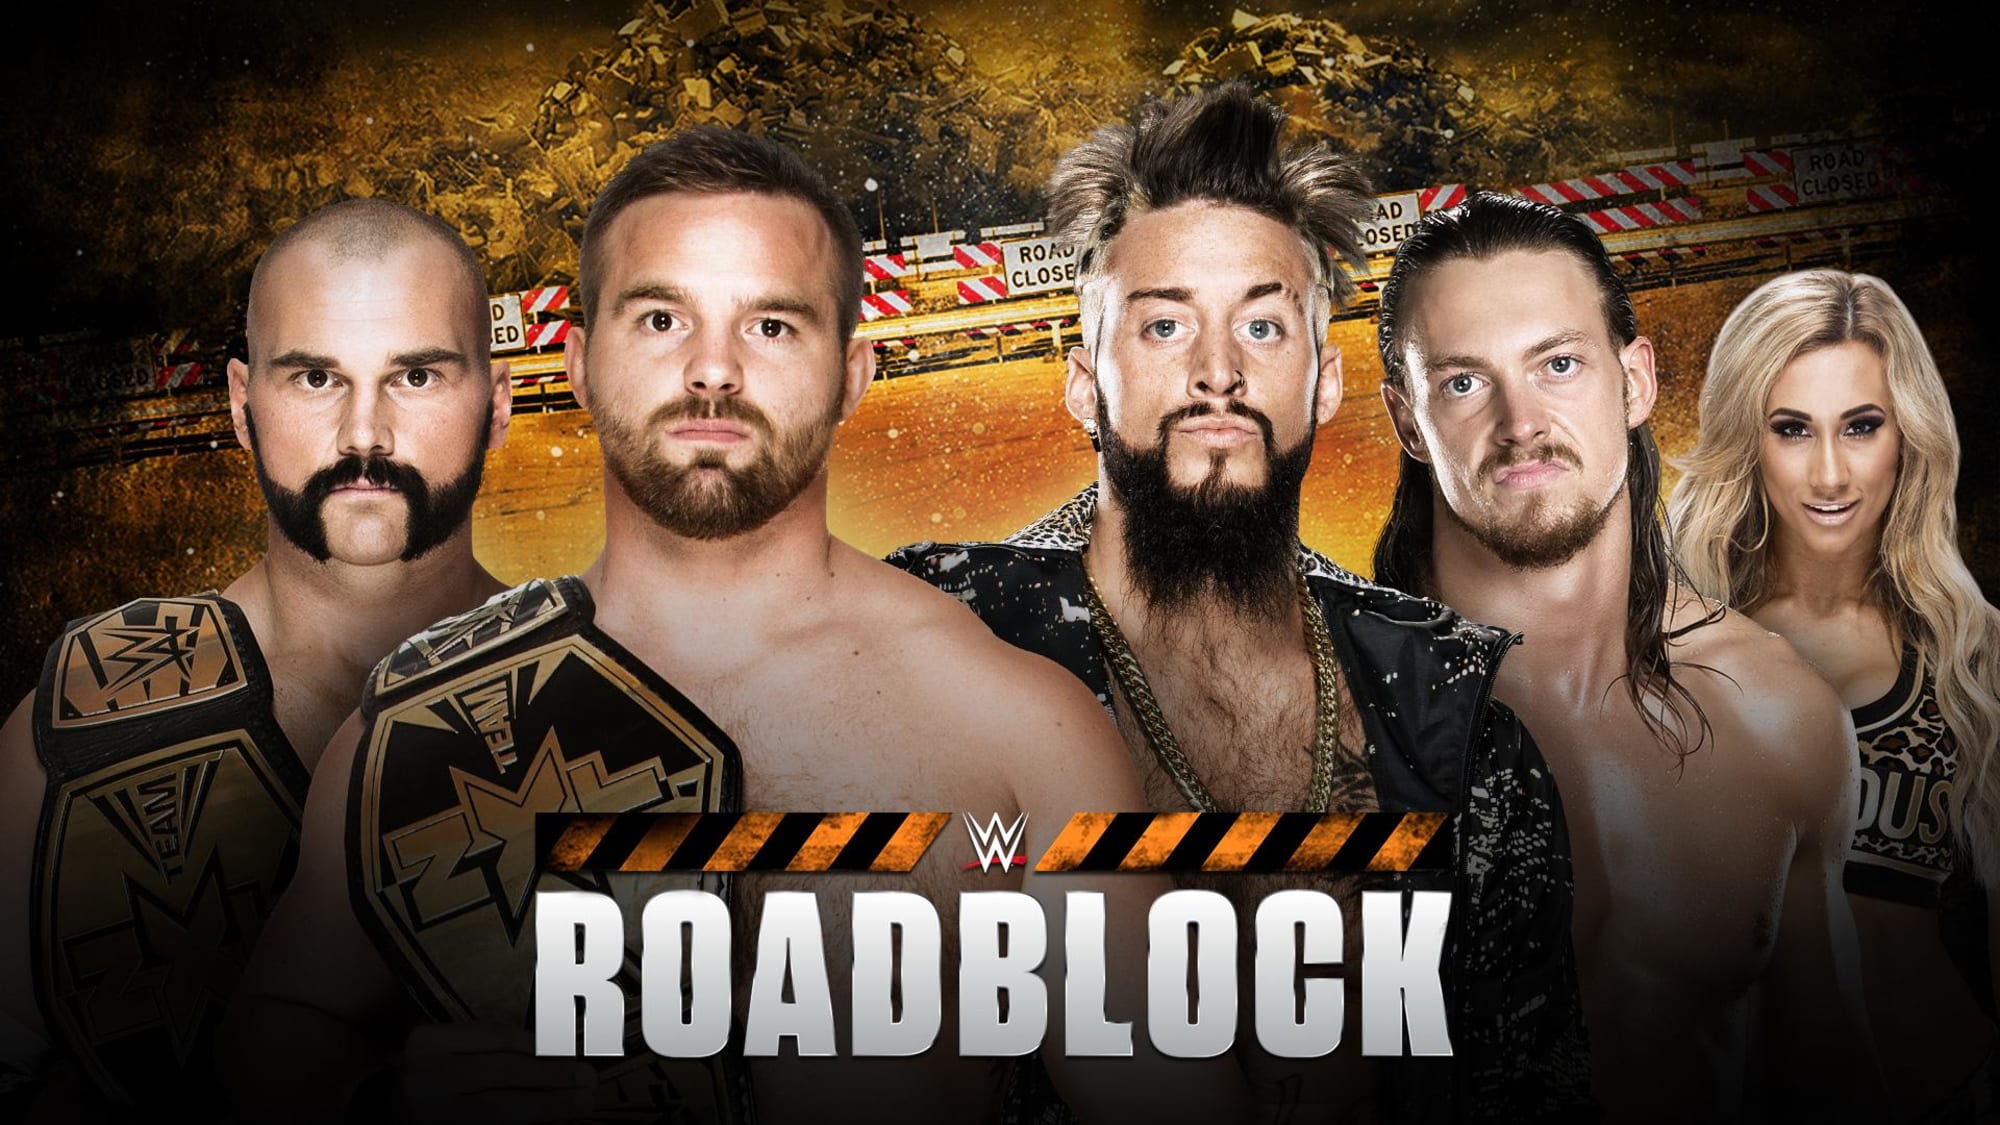 WWE Roadblock Live stream, start time, match card and more